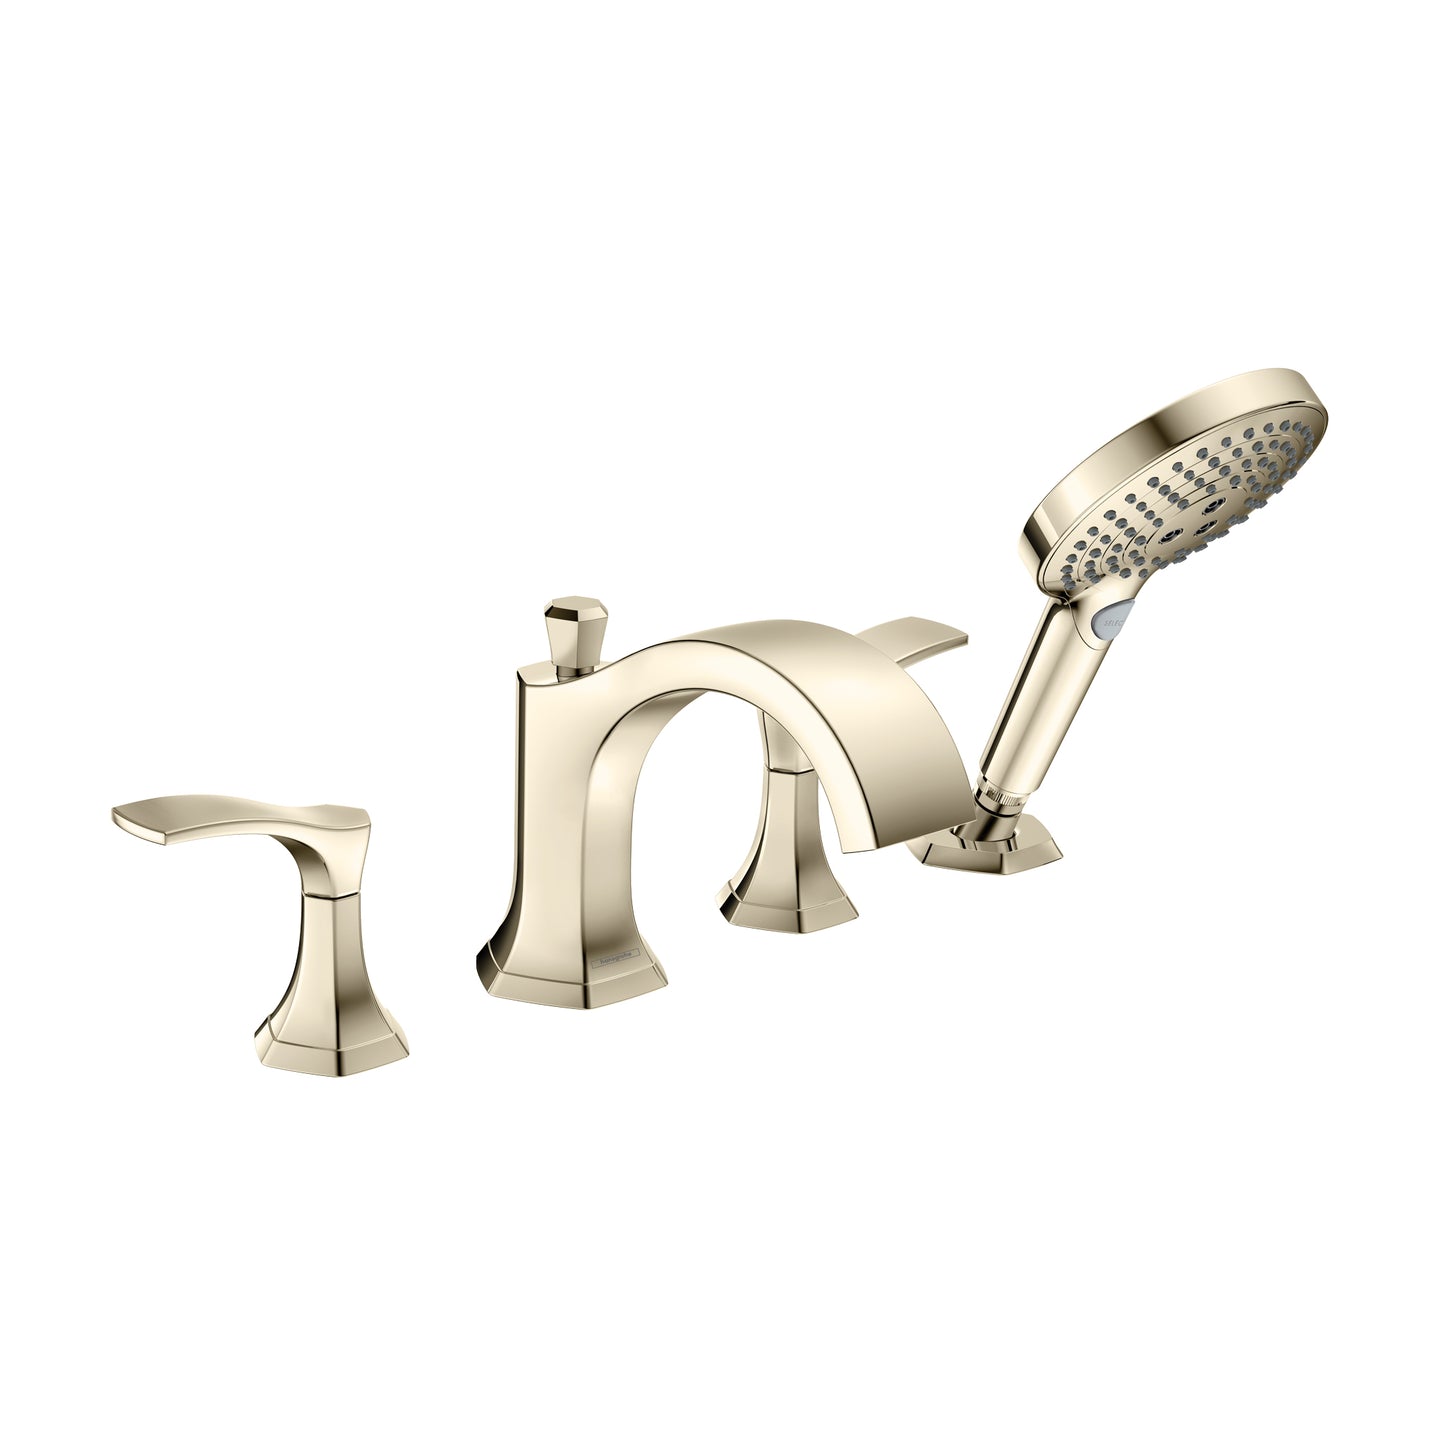 HANSGROHE 04817830 Polished Nickel Locarno Transitional Tub Filler 1.75 GPM